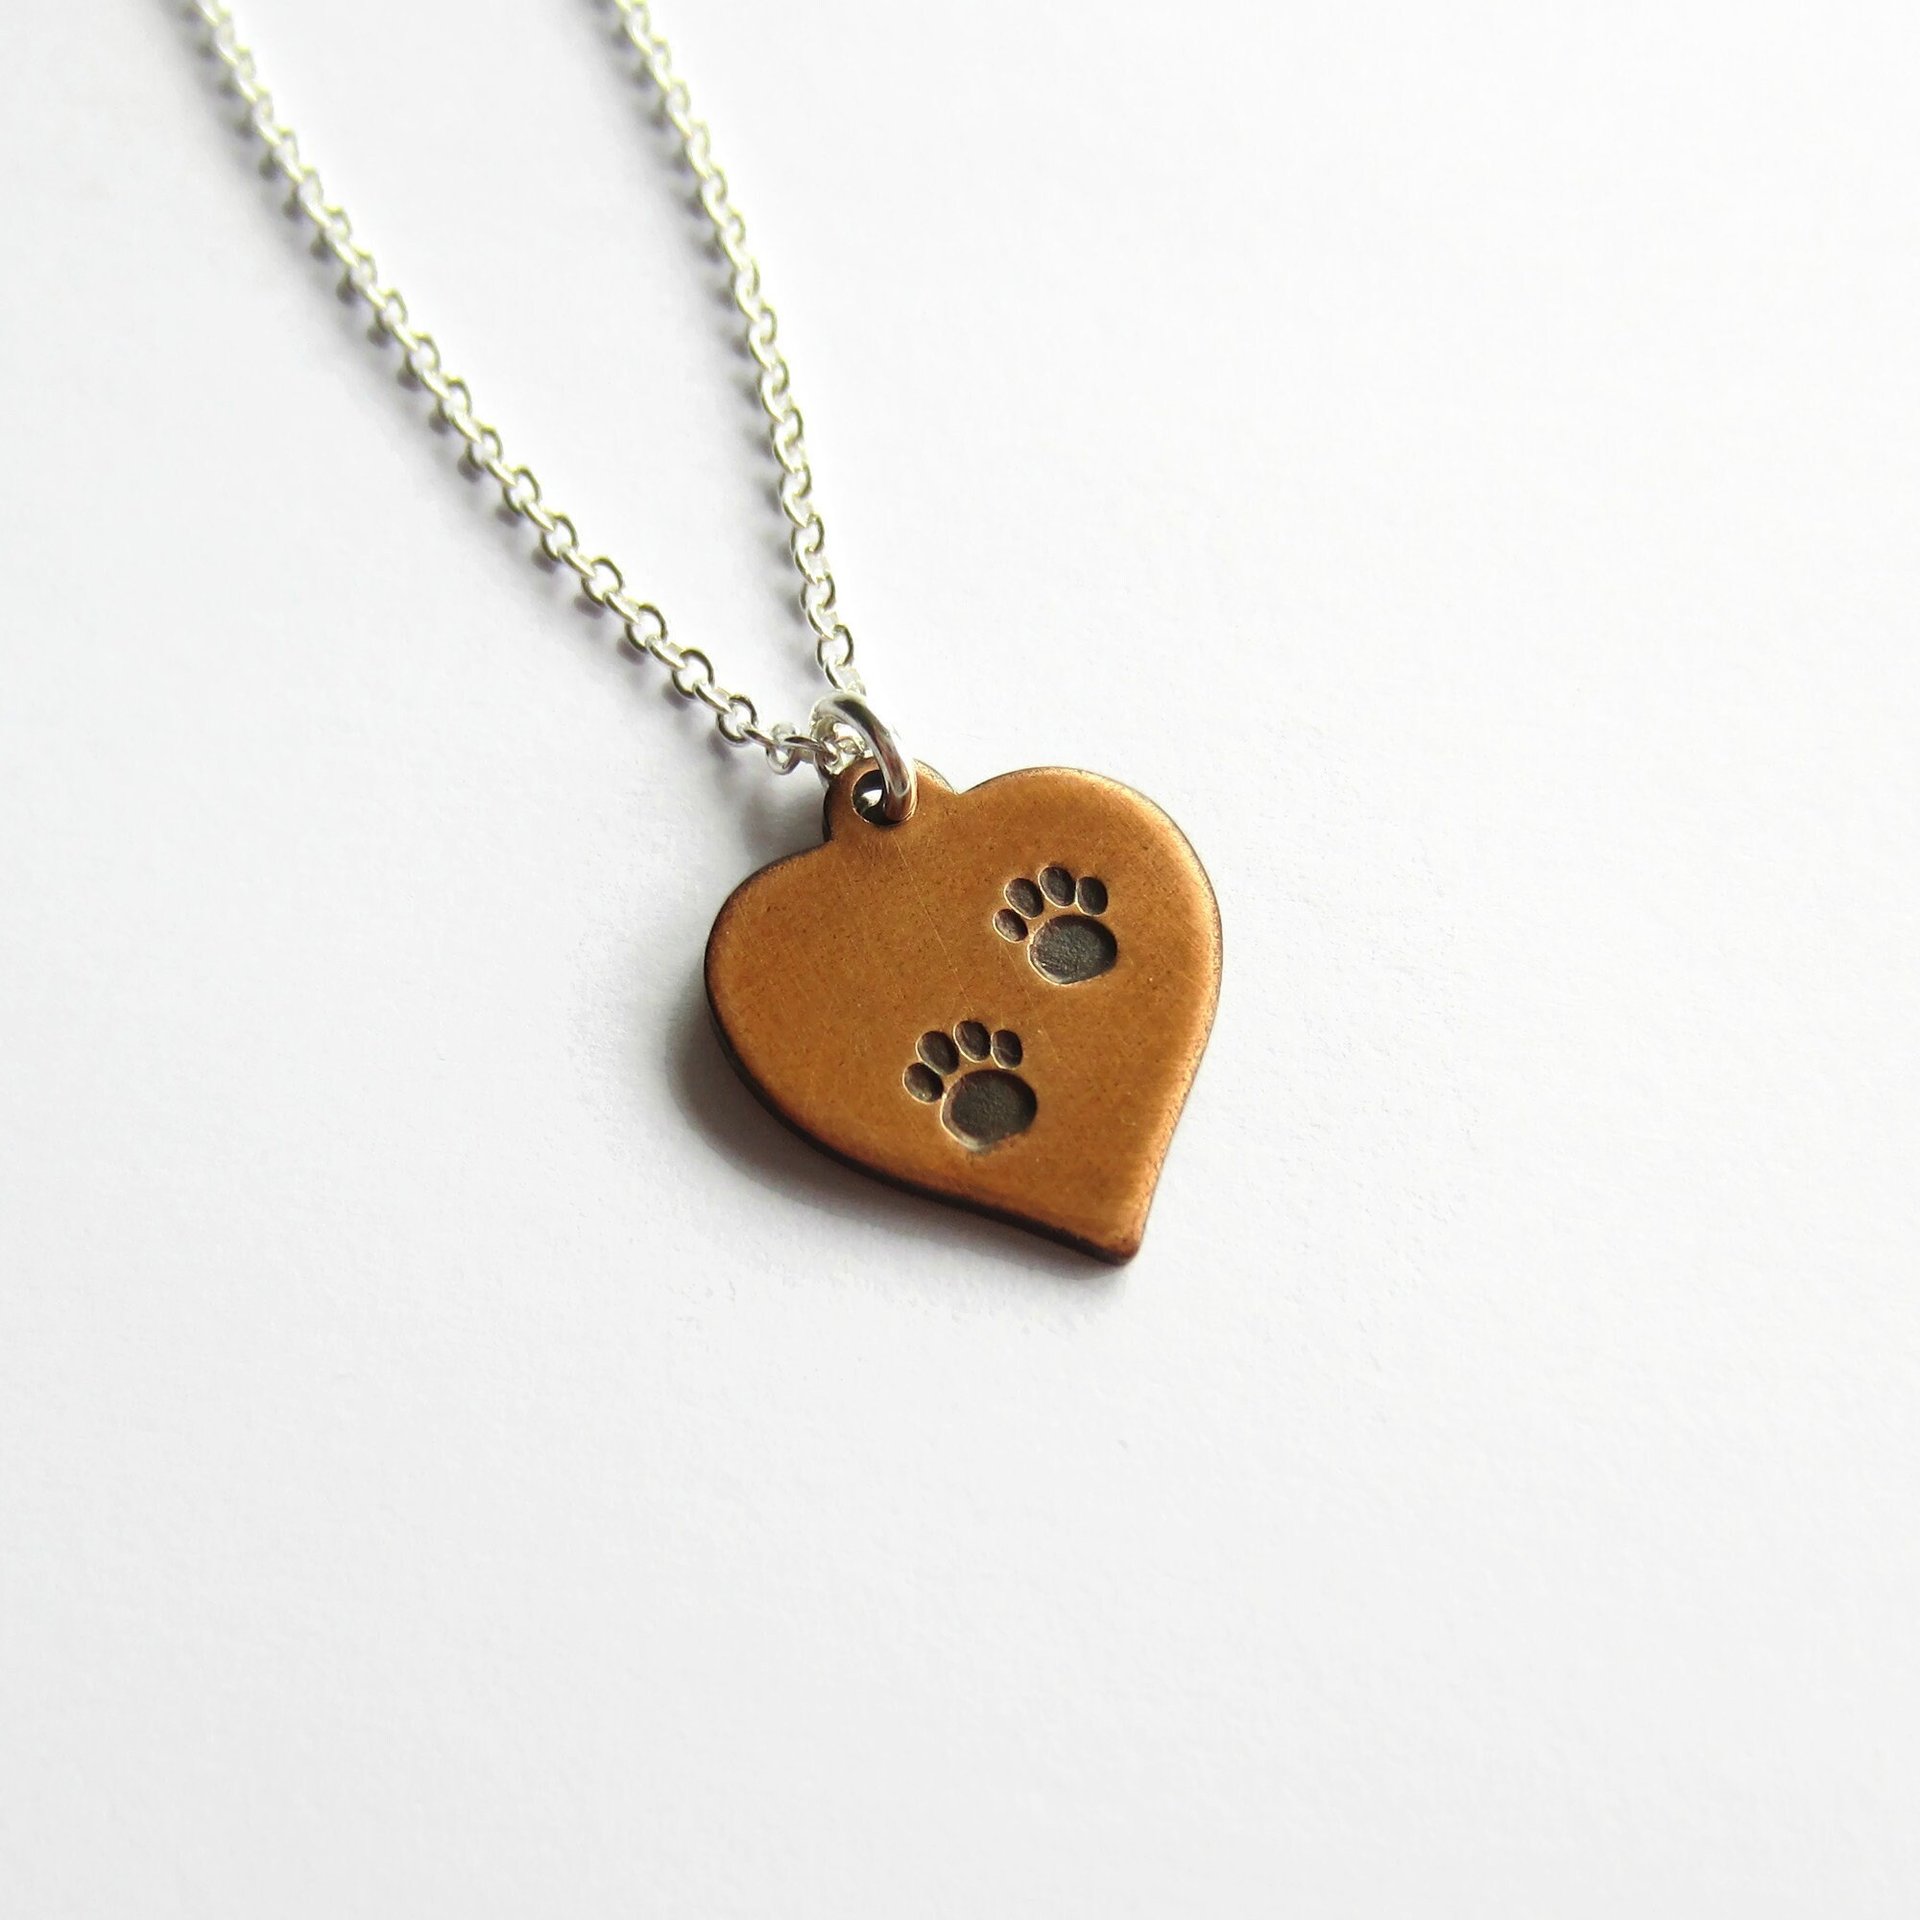 Hand Stamped Copper Paw Print Necklace ~ Handmade by The Tiny Tree Frog Jewellery